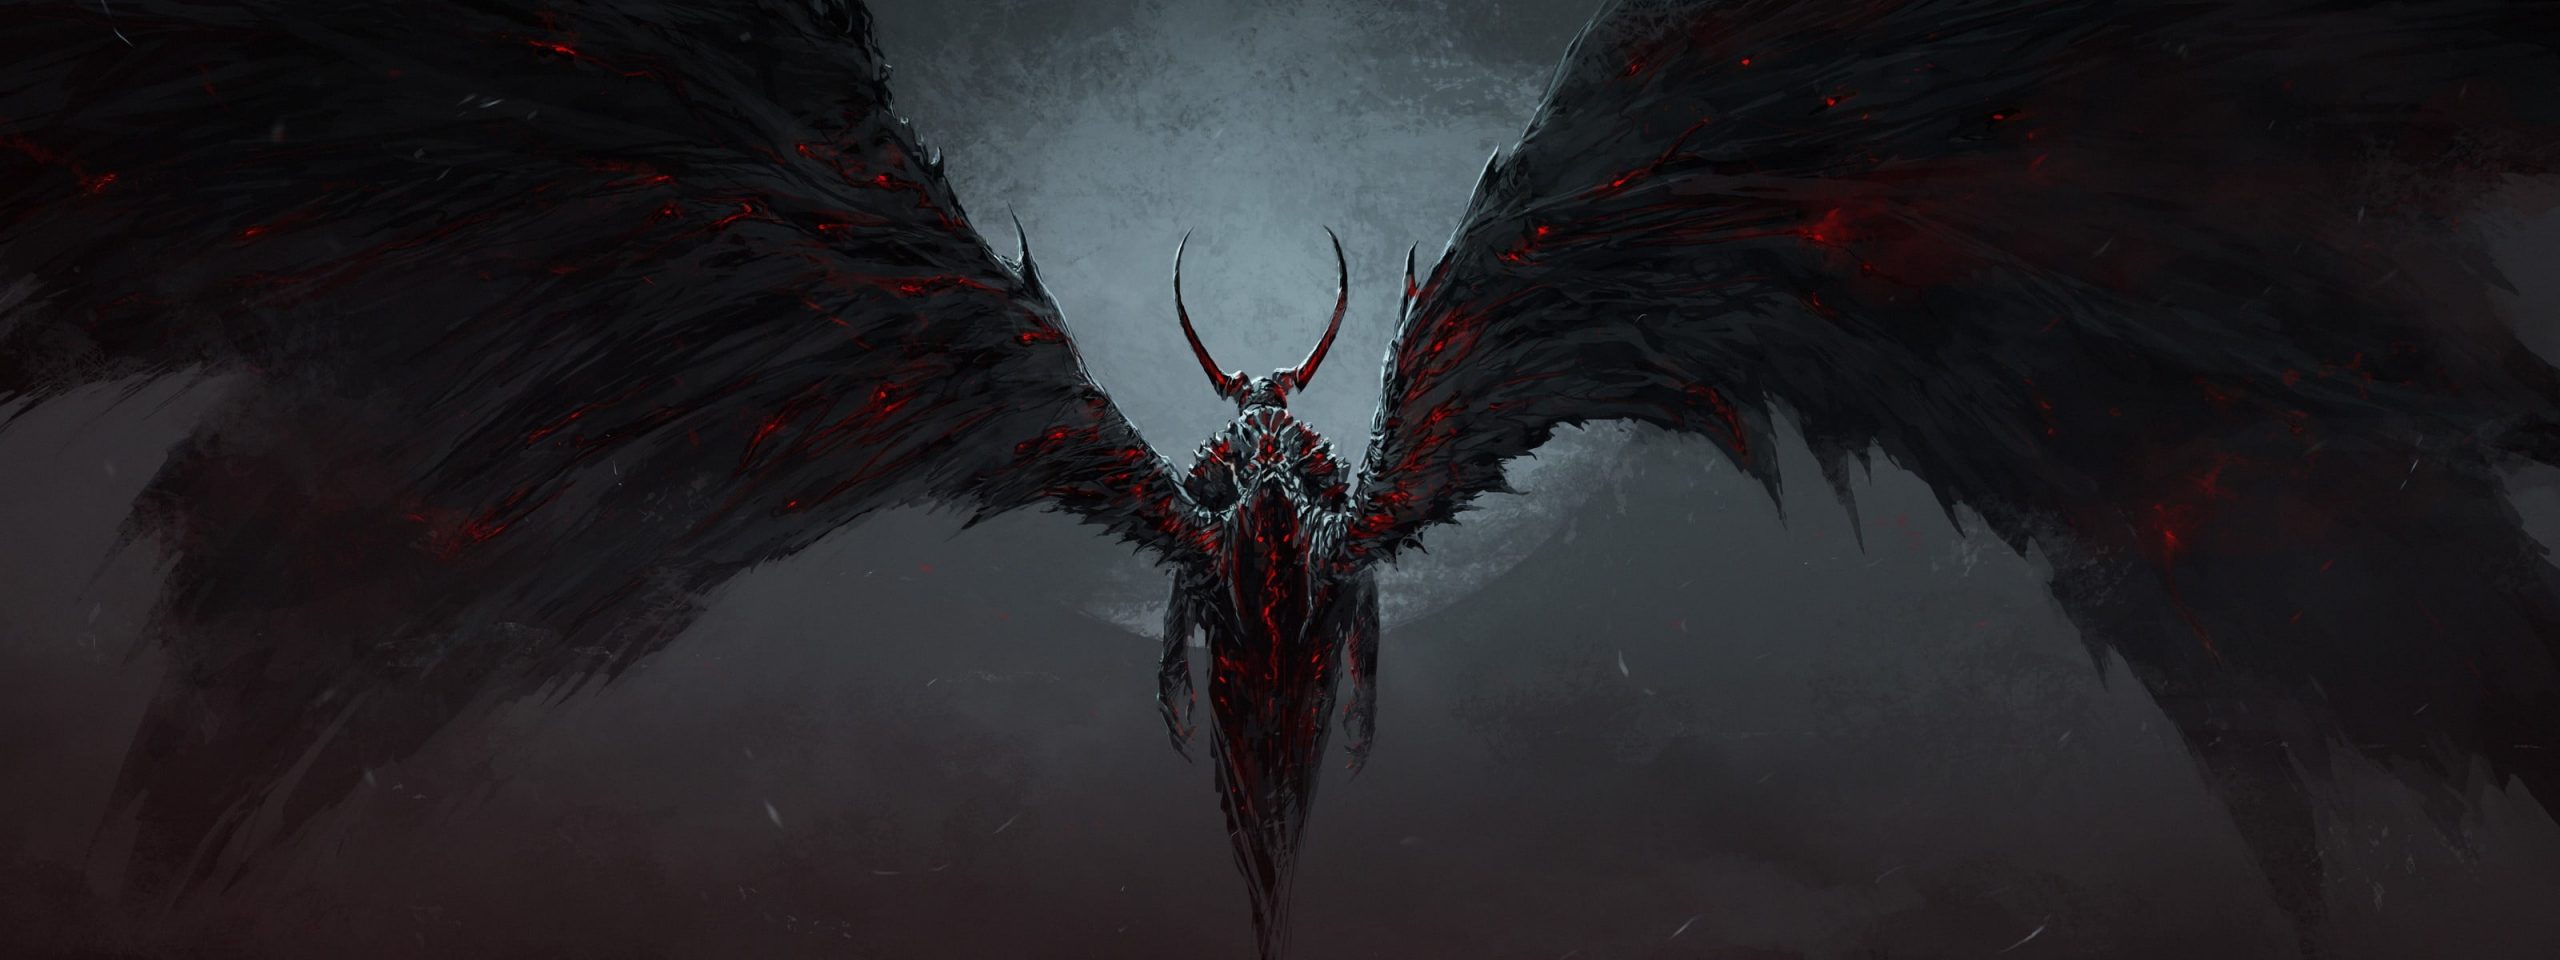 Lucifer wallpaper, anime character with wings, artwork, fantasy art